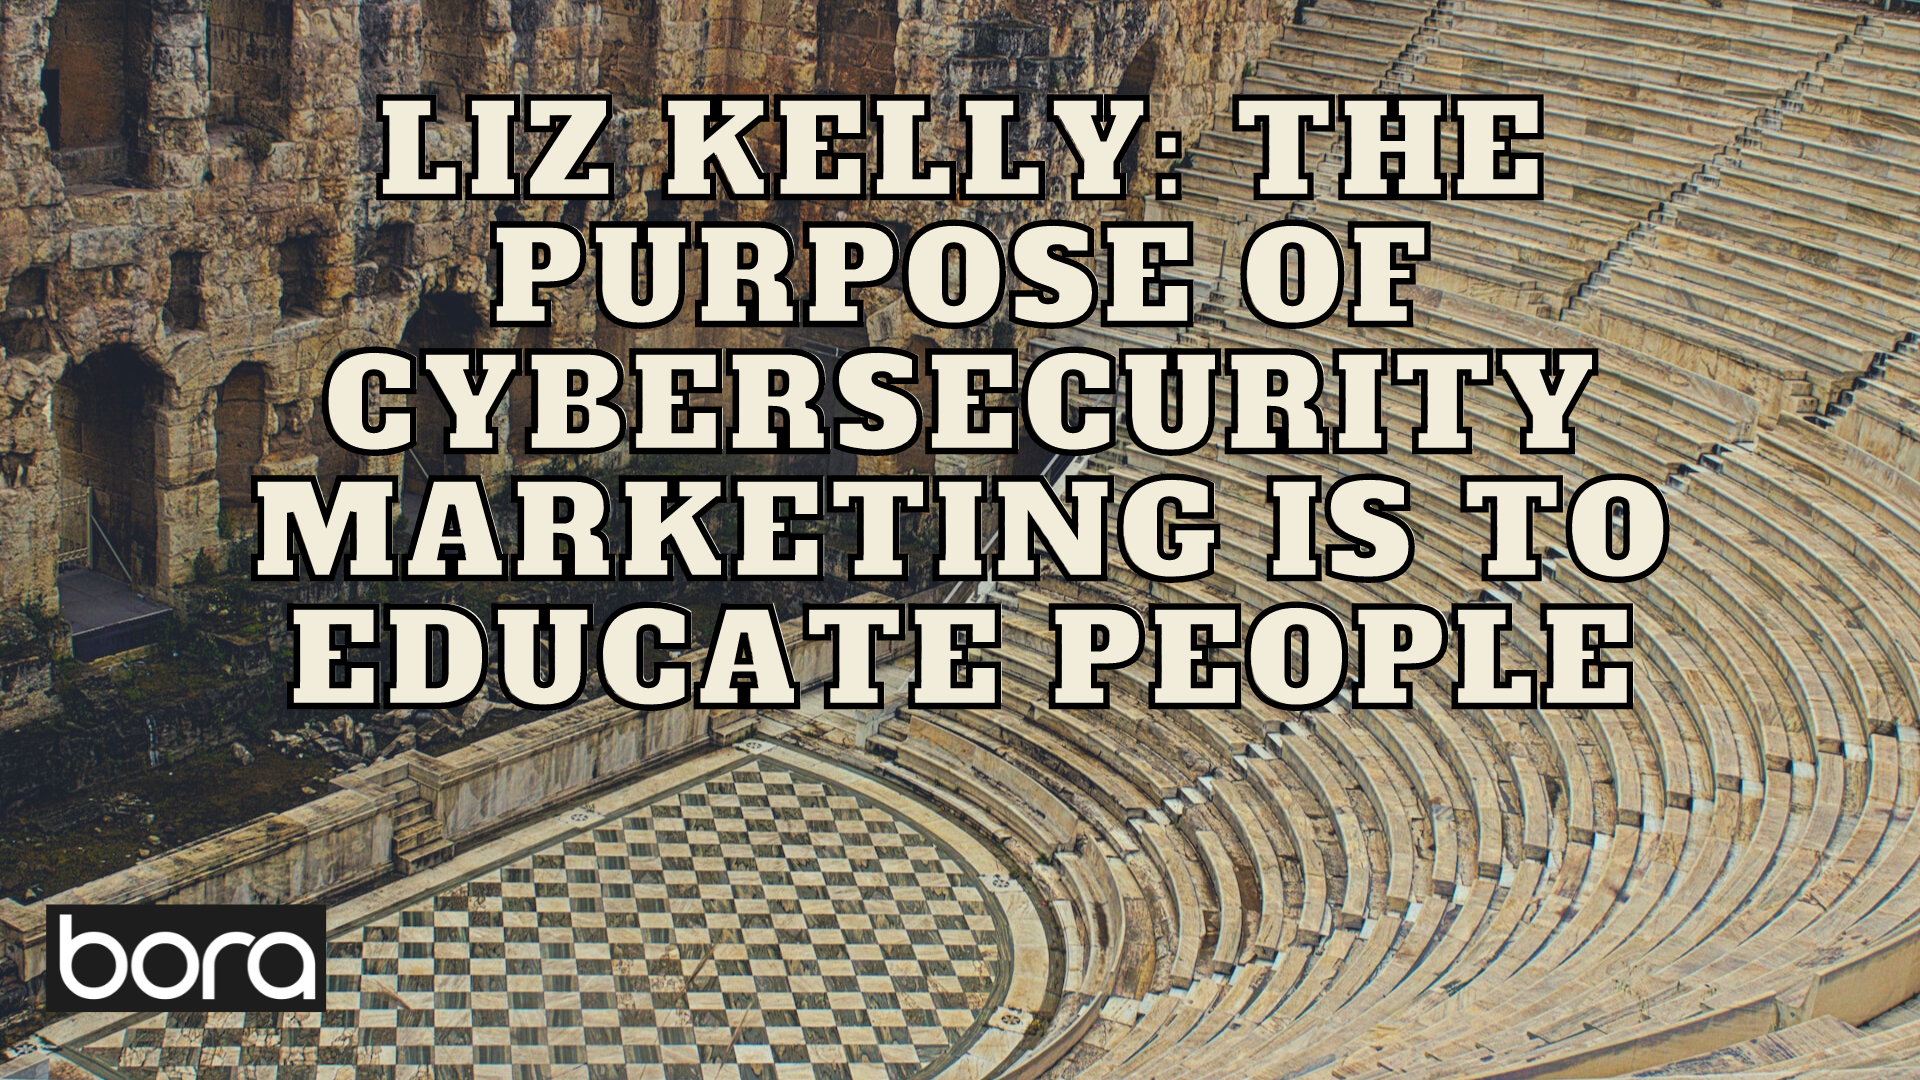 The purpose of cybersecurity marketing is to educate people